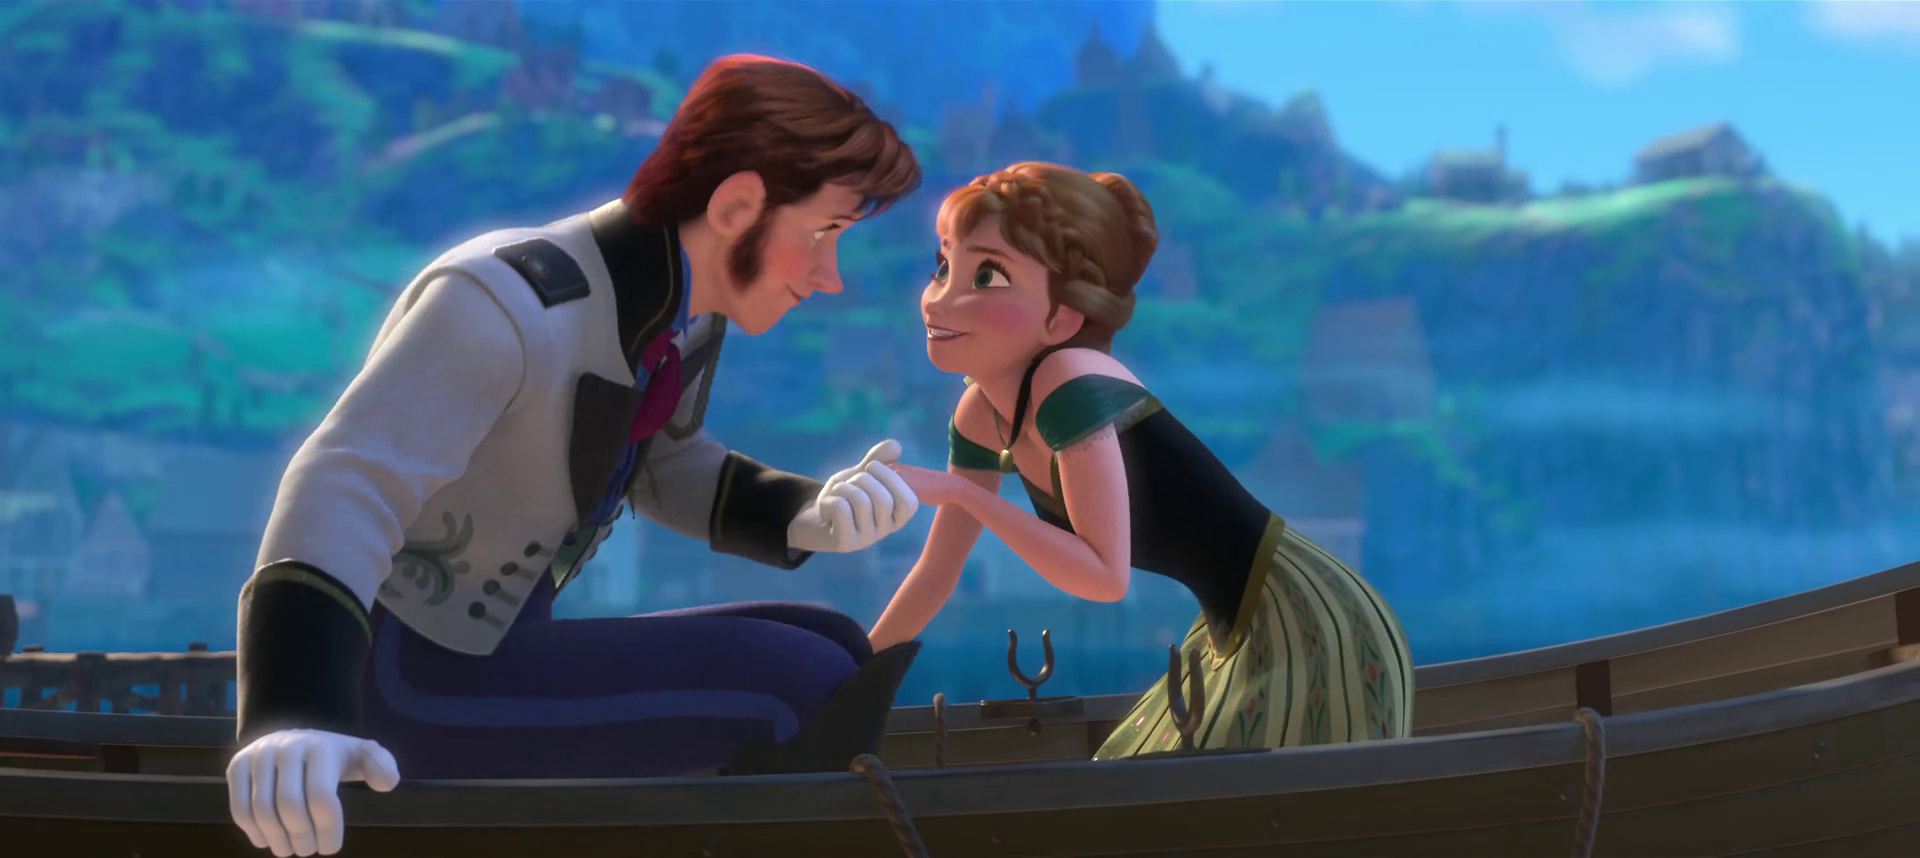 Animation Film Review: Frozen (2013) 